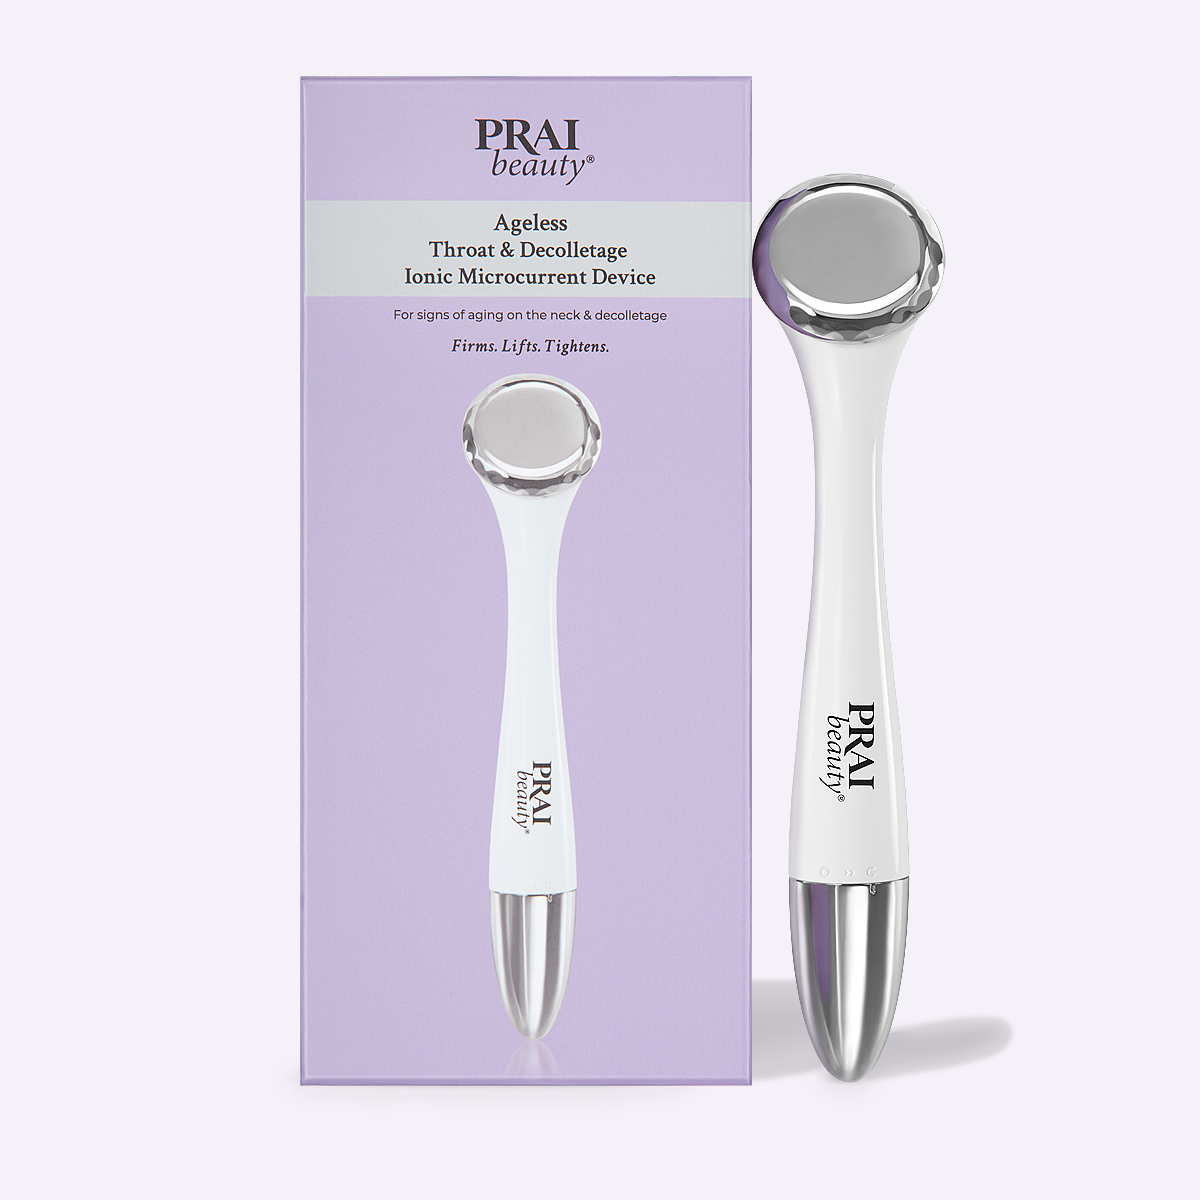 Ageless Throat & Decolletage Ionic Microcurrent Device